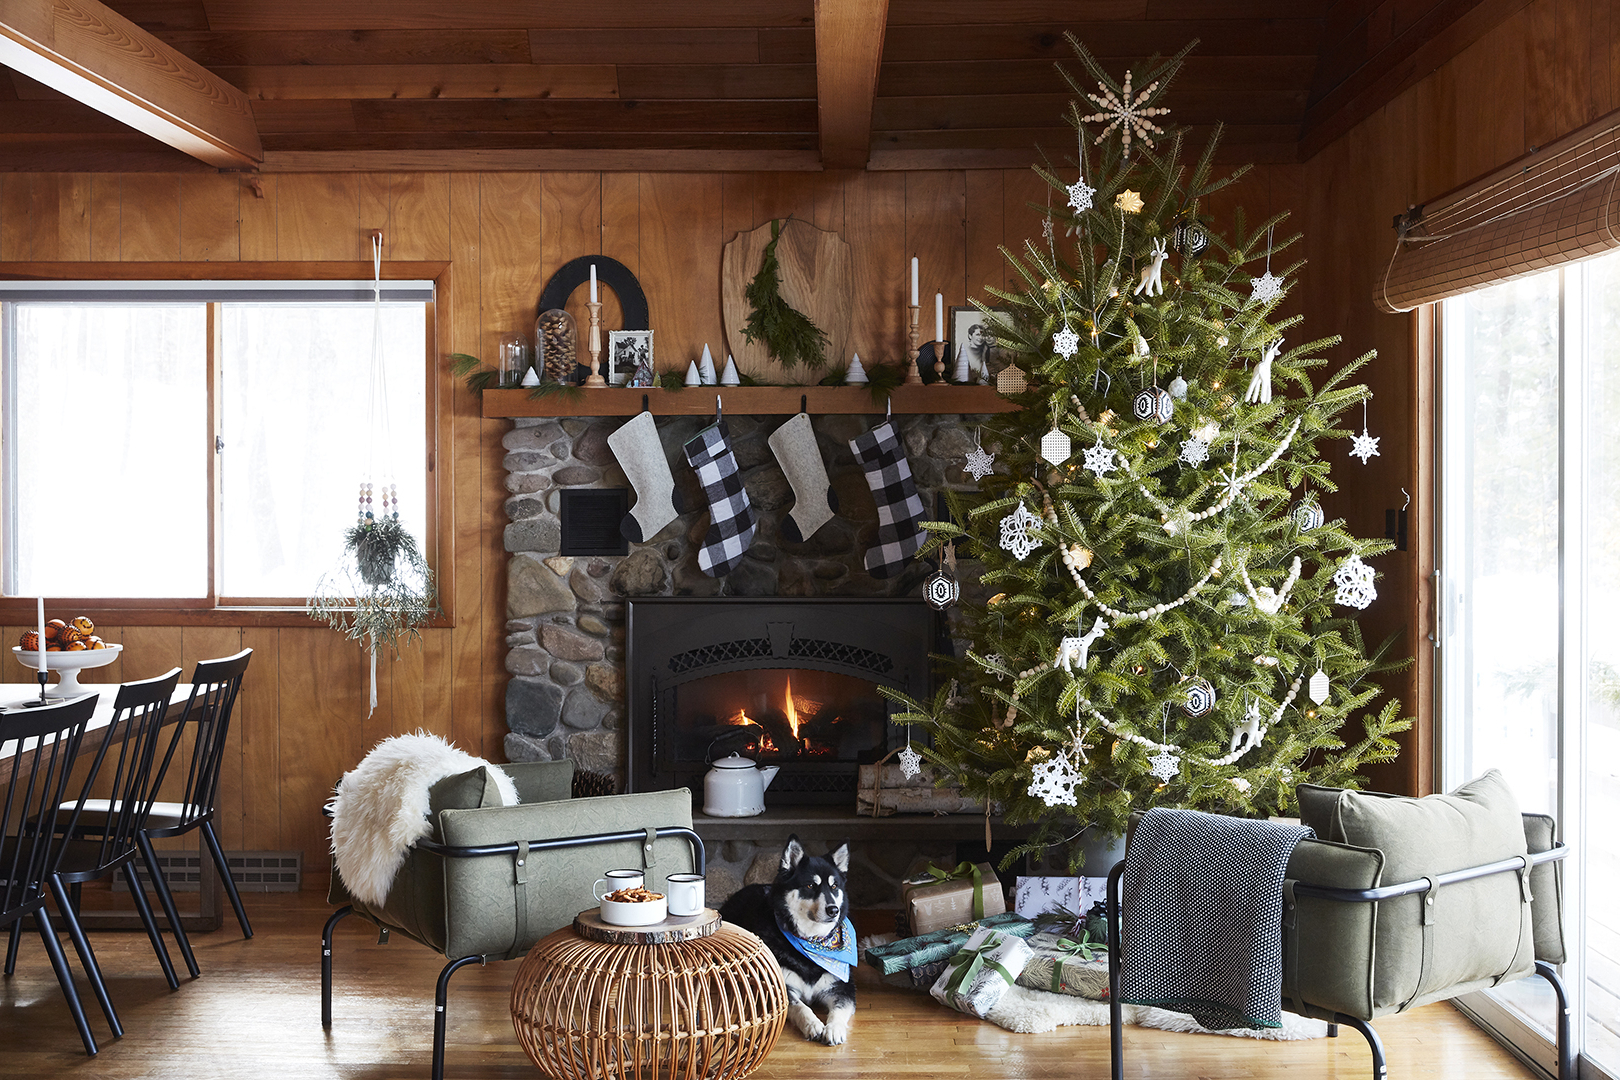 41 Pretty Ways To Decorate Your Mantel For Christmas